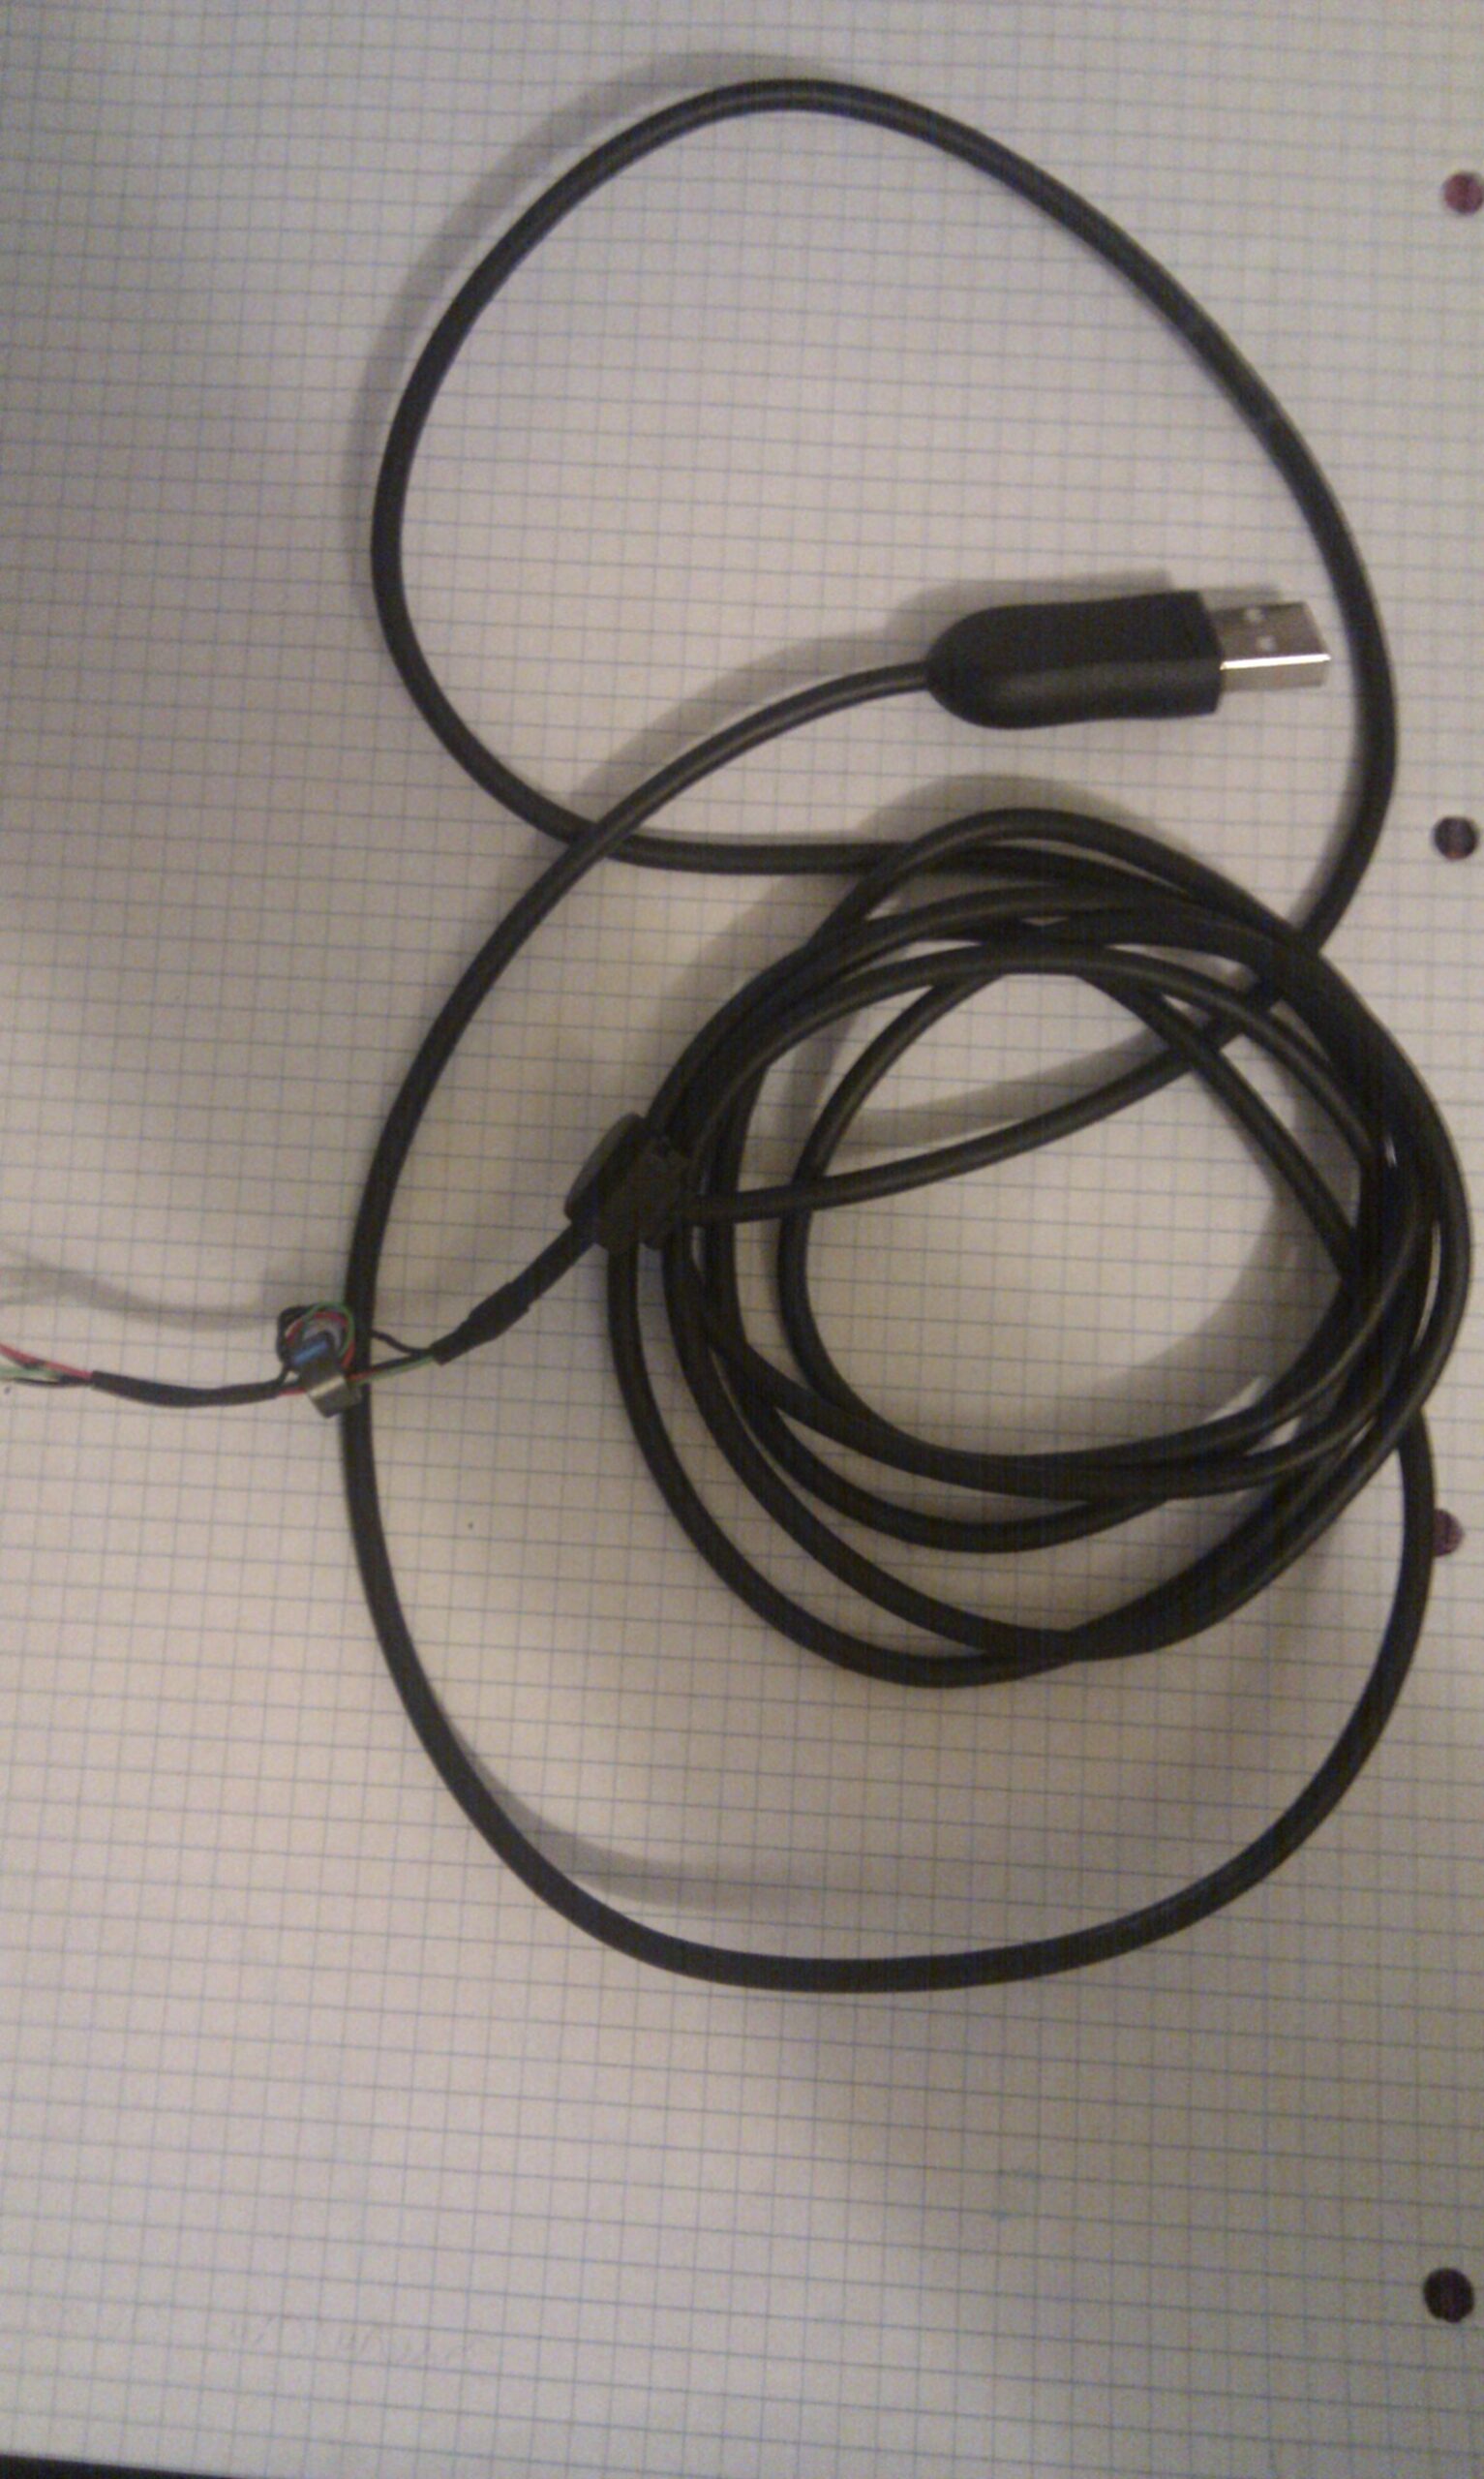 A leftover USB cable